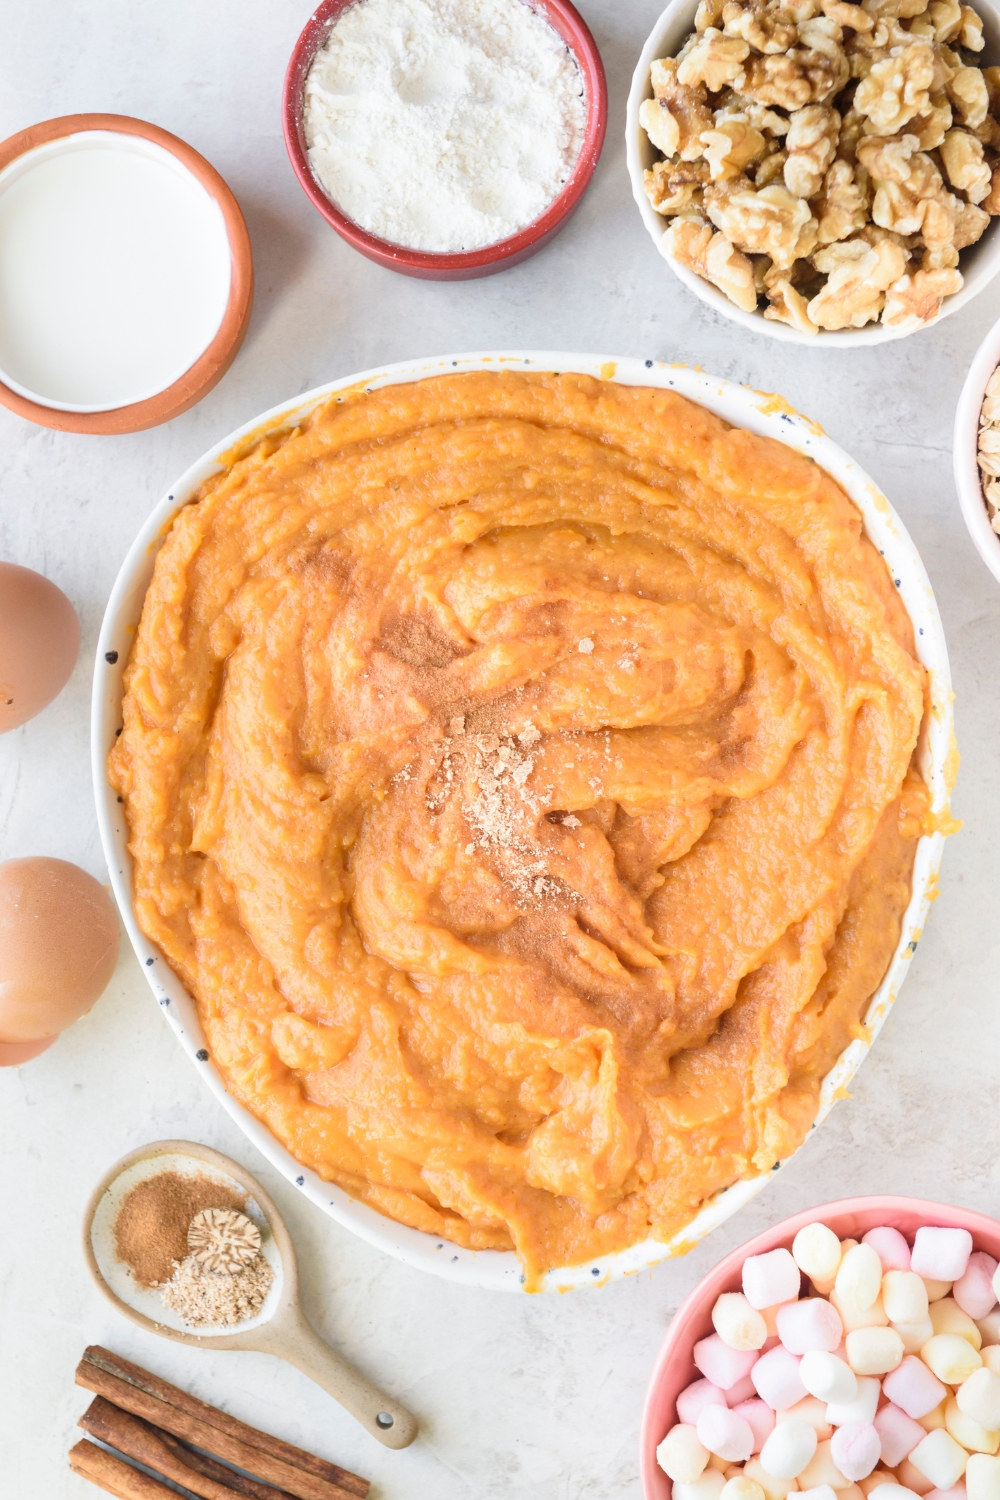 A large bowl of mashed sweet potatoes with spices on top on a white counter. Bowls of walnuts, flour, cream, 2 eggs, spices, and mini marshmallows surround the bowl.